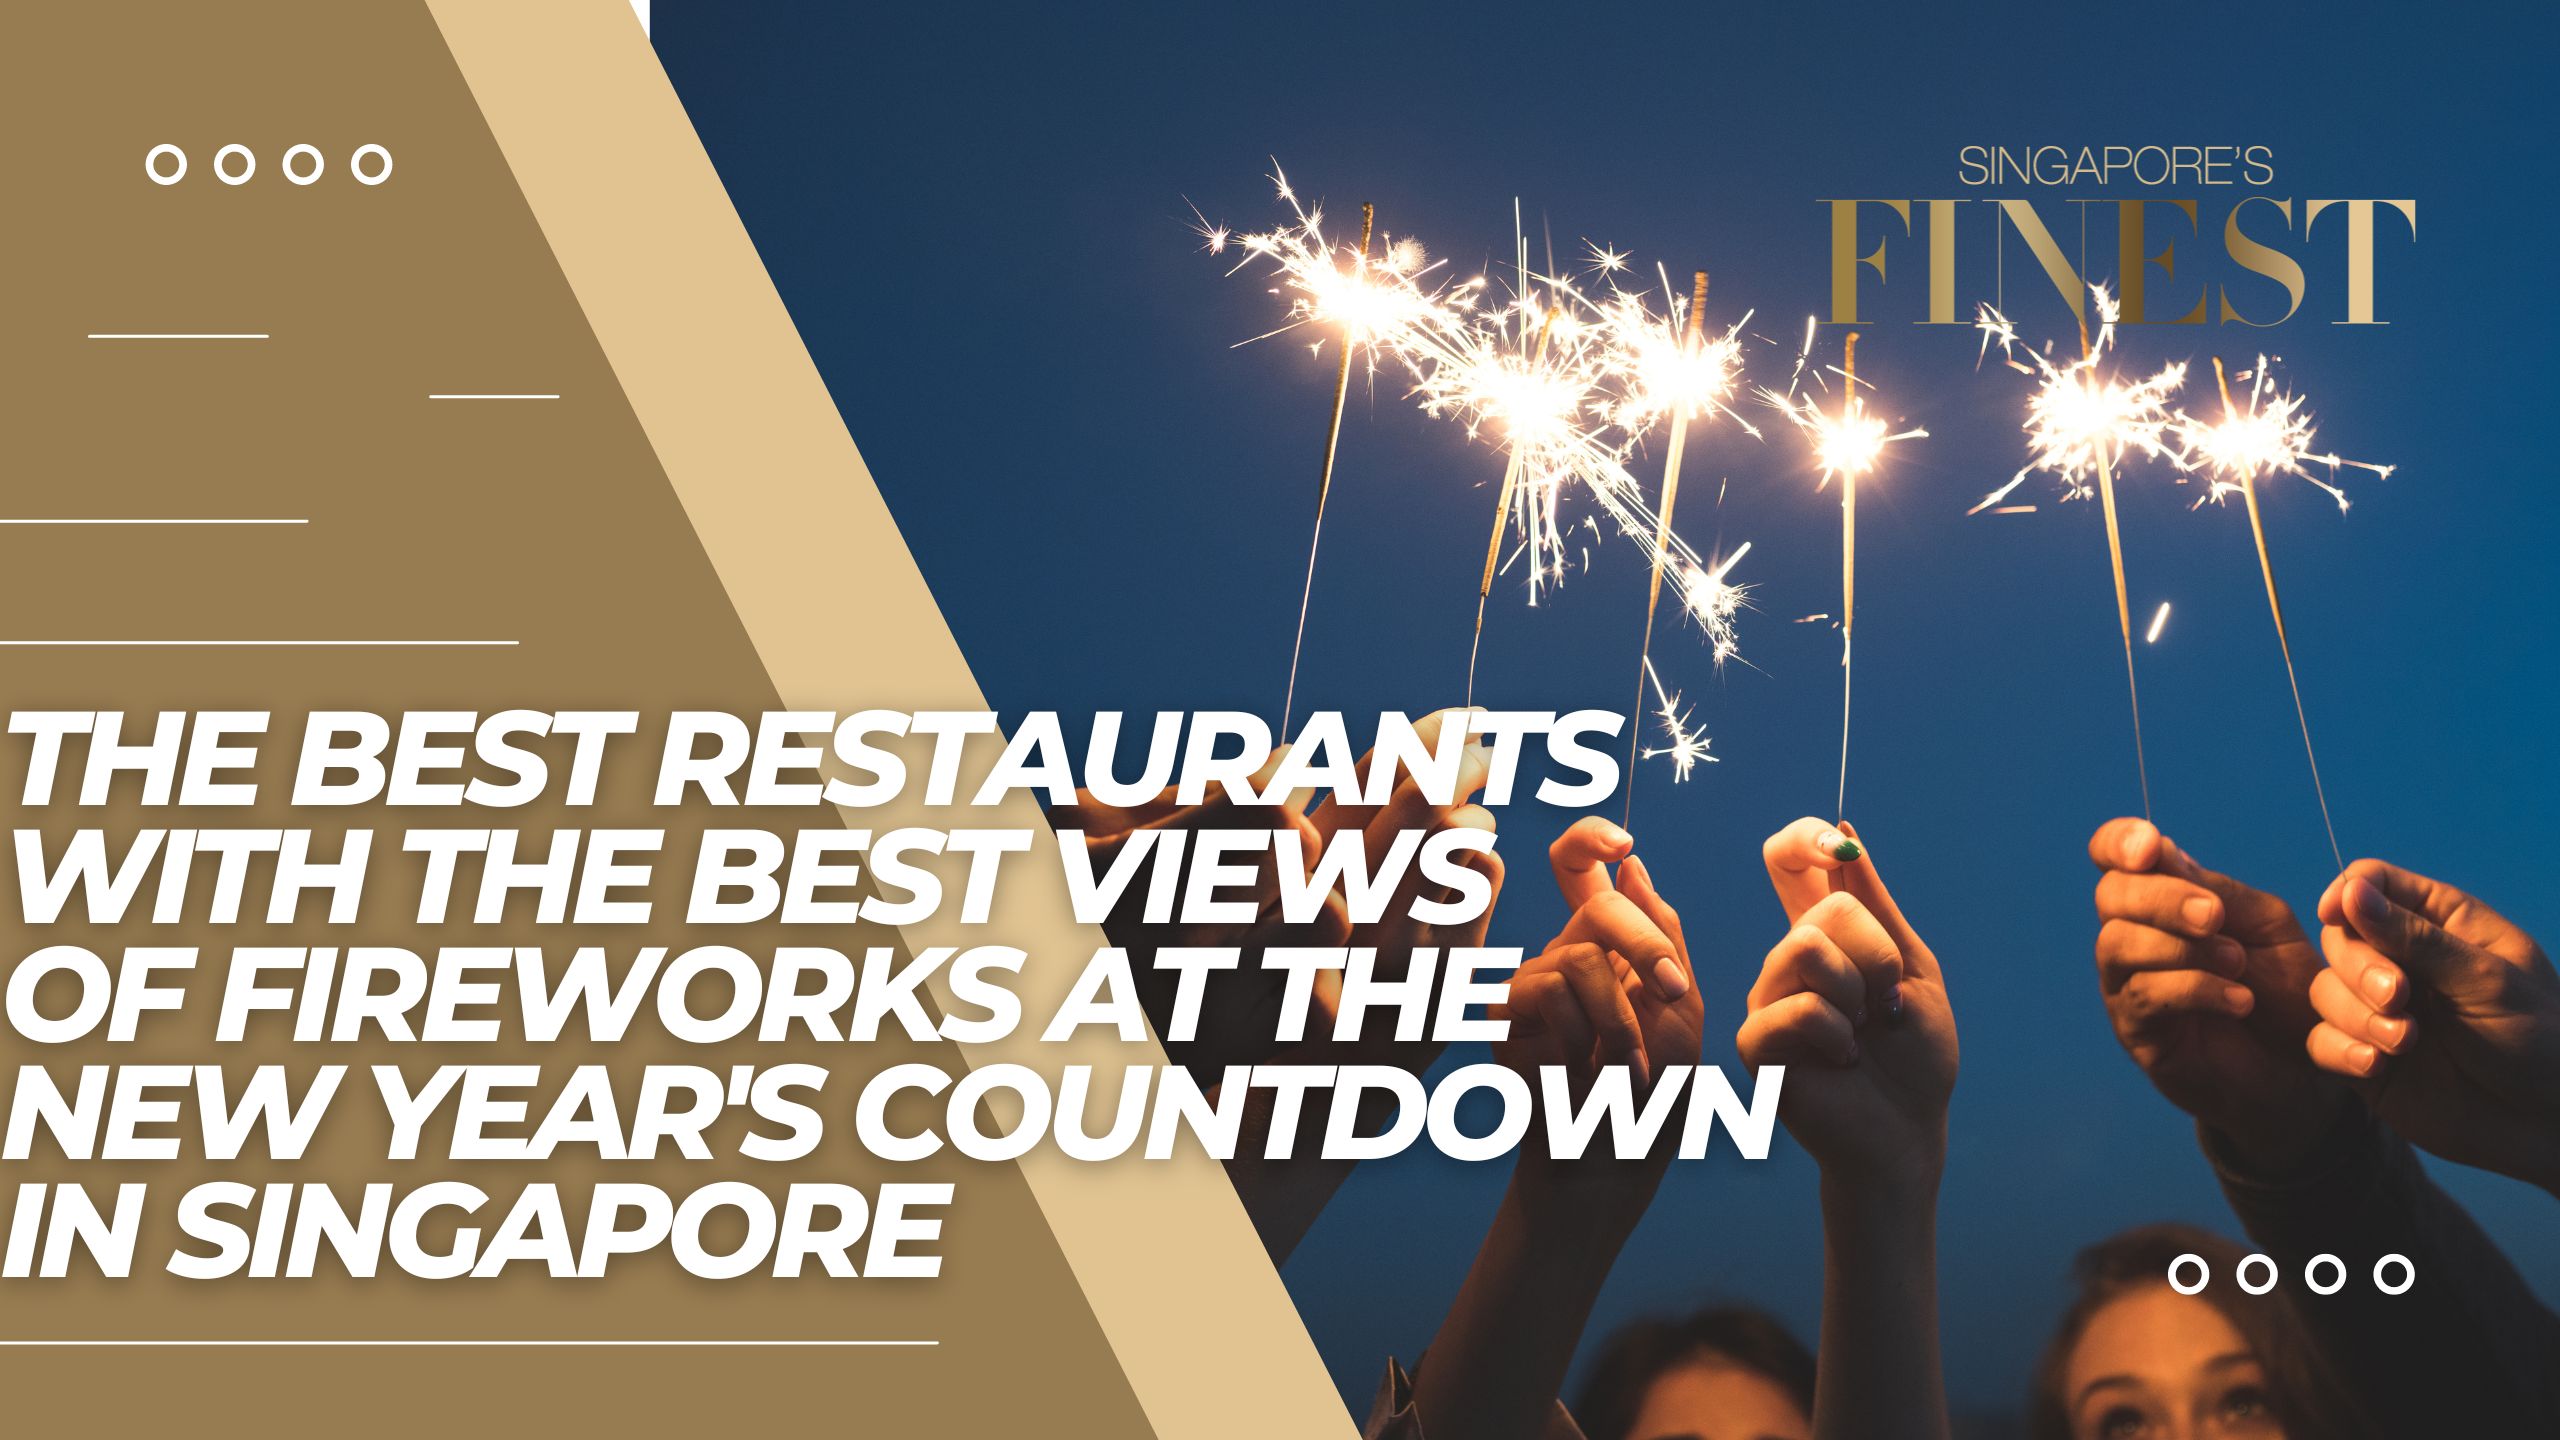 The Finest Restaurants with the Best Views of the Fireworks at the New Year's Countdown in Singapore